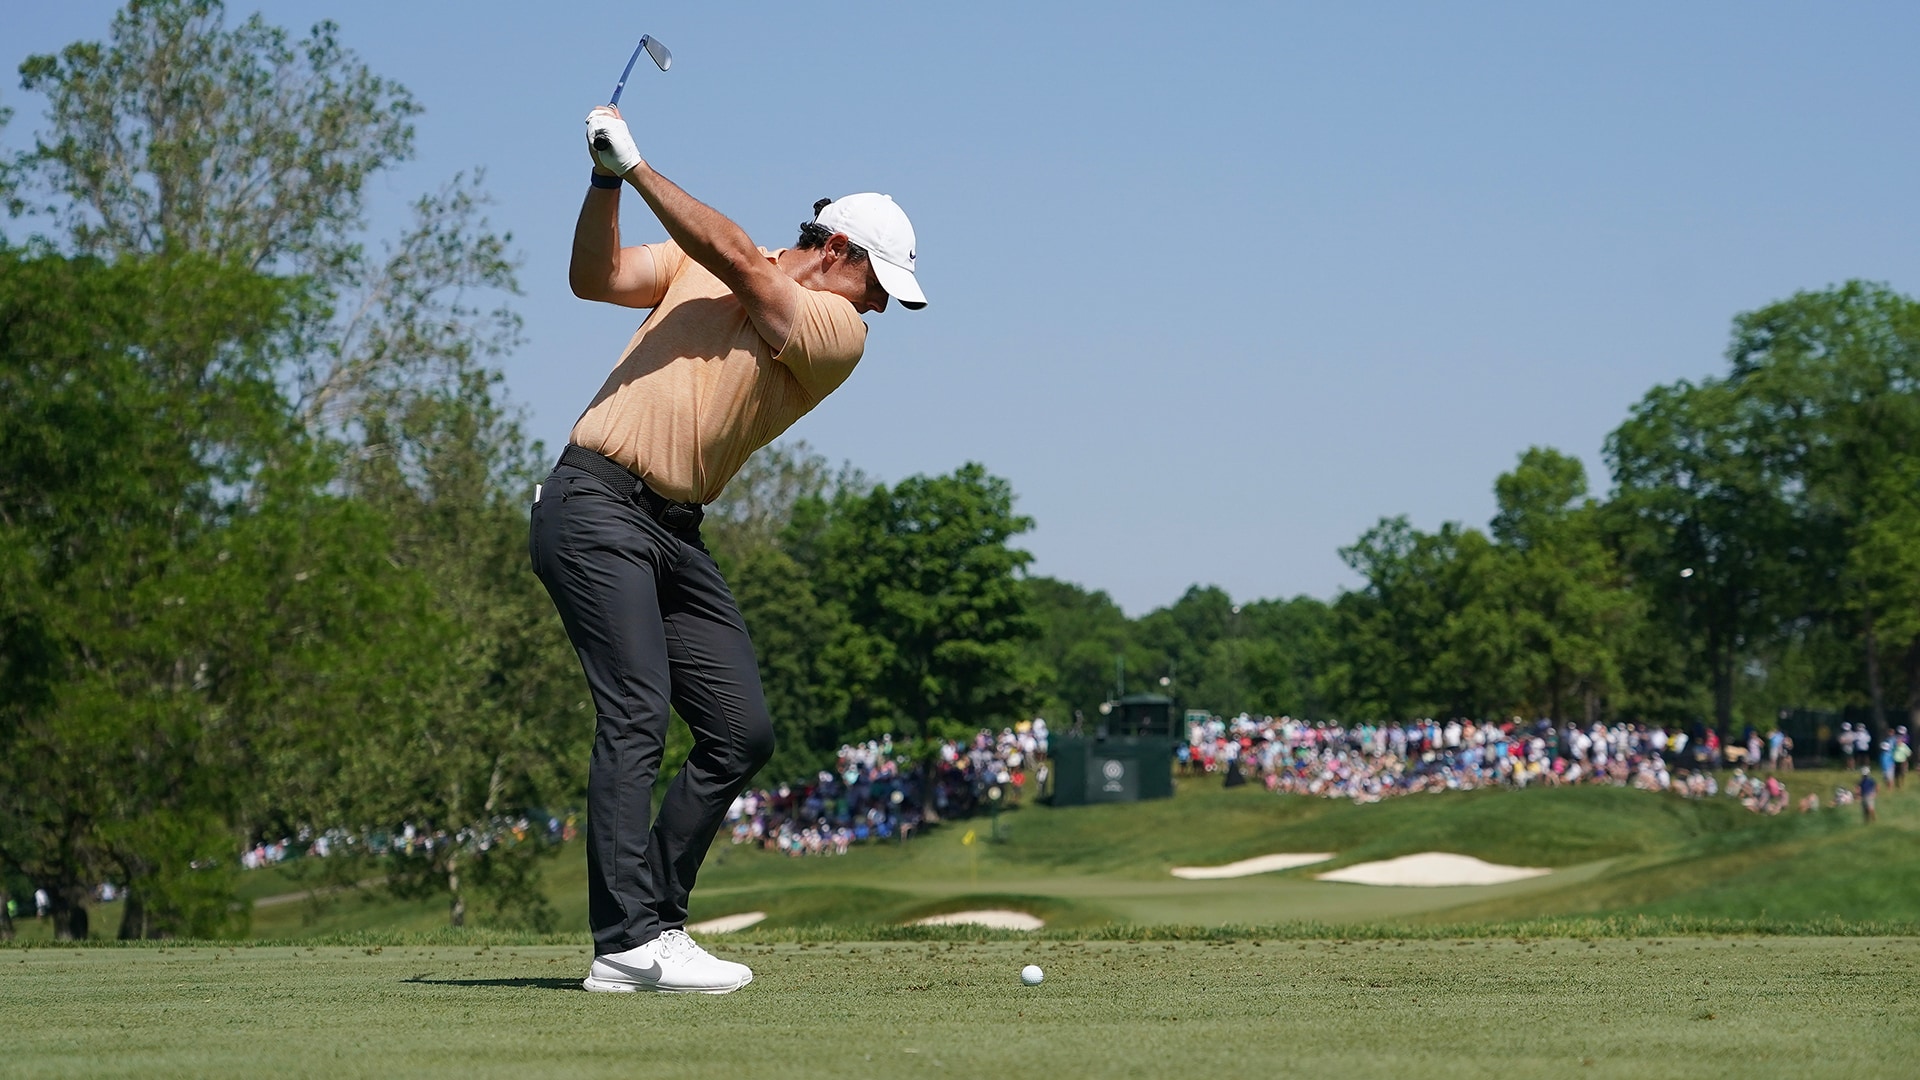 The ‘process’ continues for Rory McIlroy as he gets closer to solidifying swing